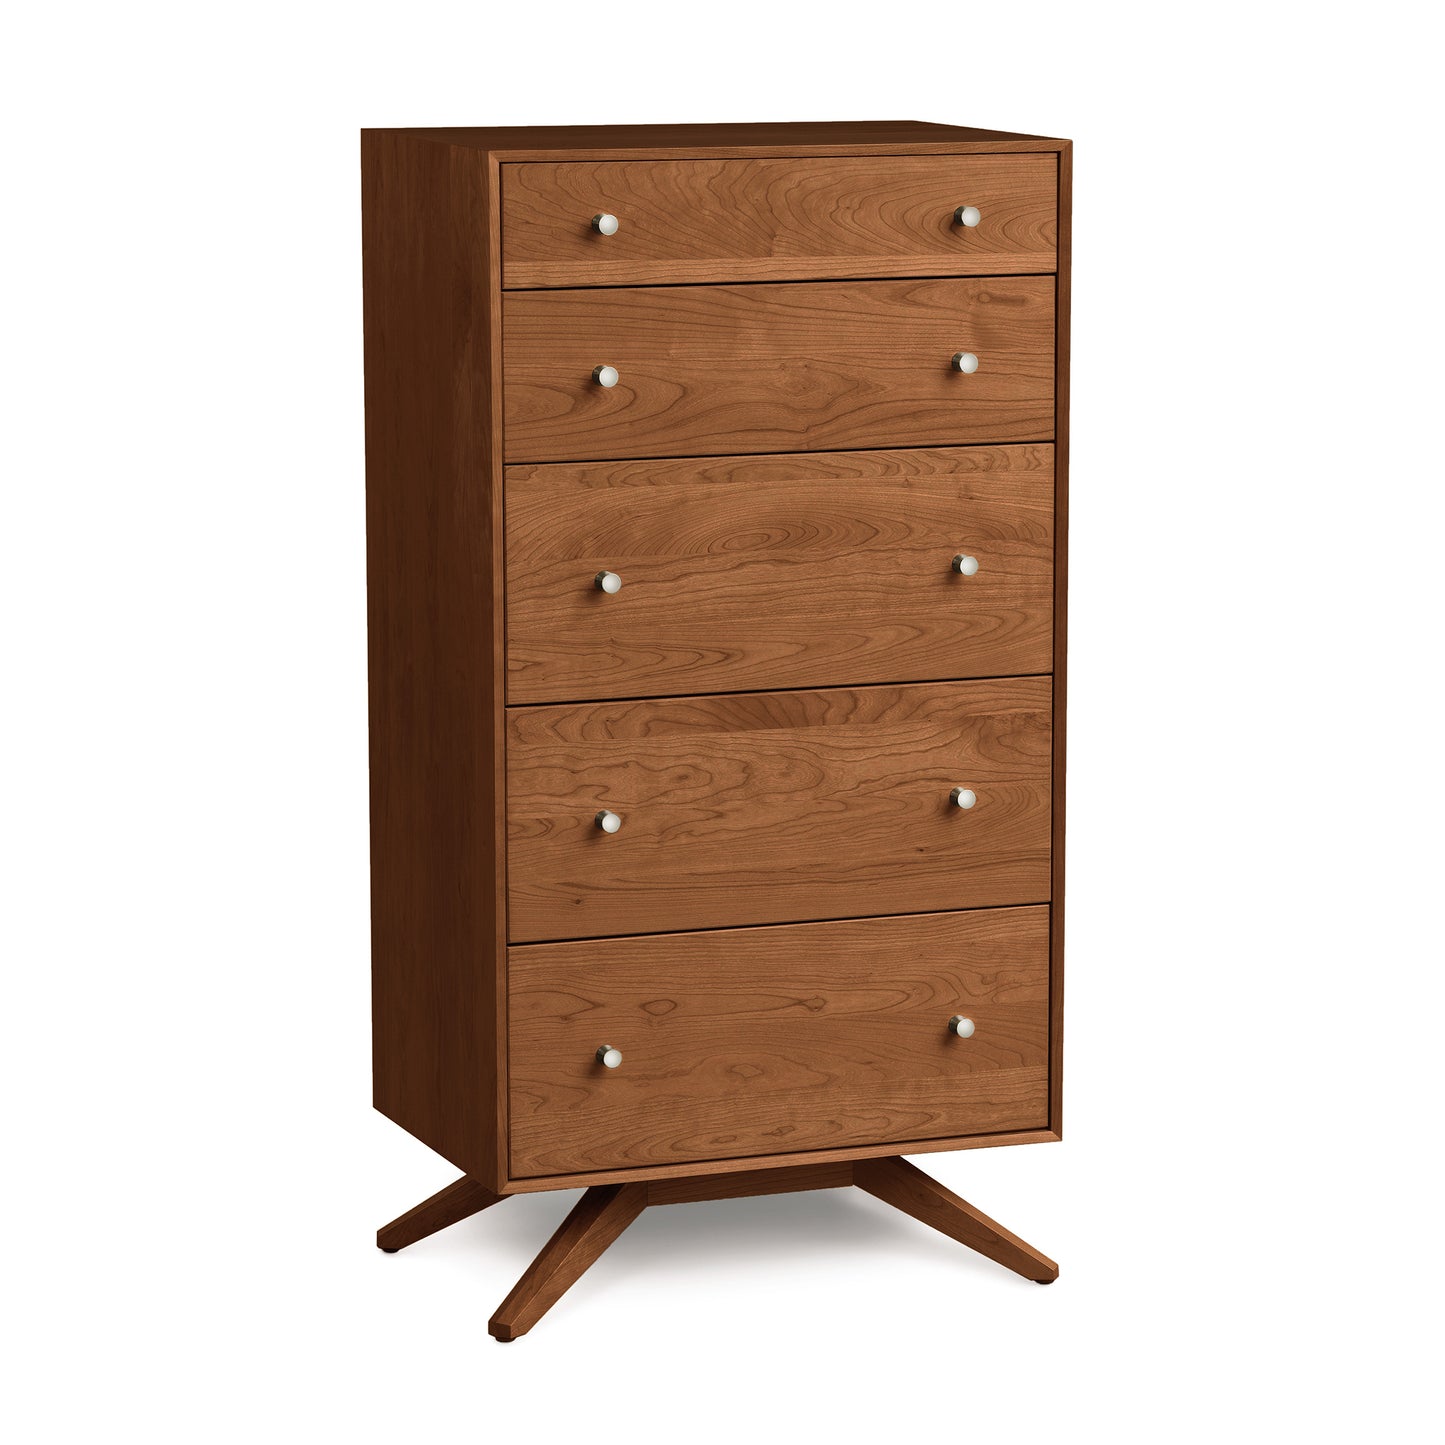 A wooden mid-century modern style Copeland Furniture Astrid Cherry 5 Drawer Chest with tapered legs, crafted from solid cherry hardwood.